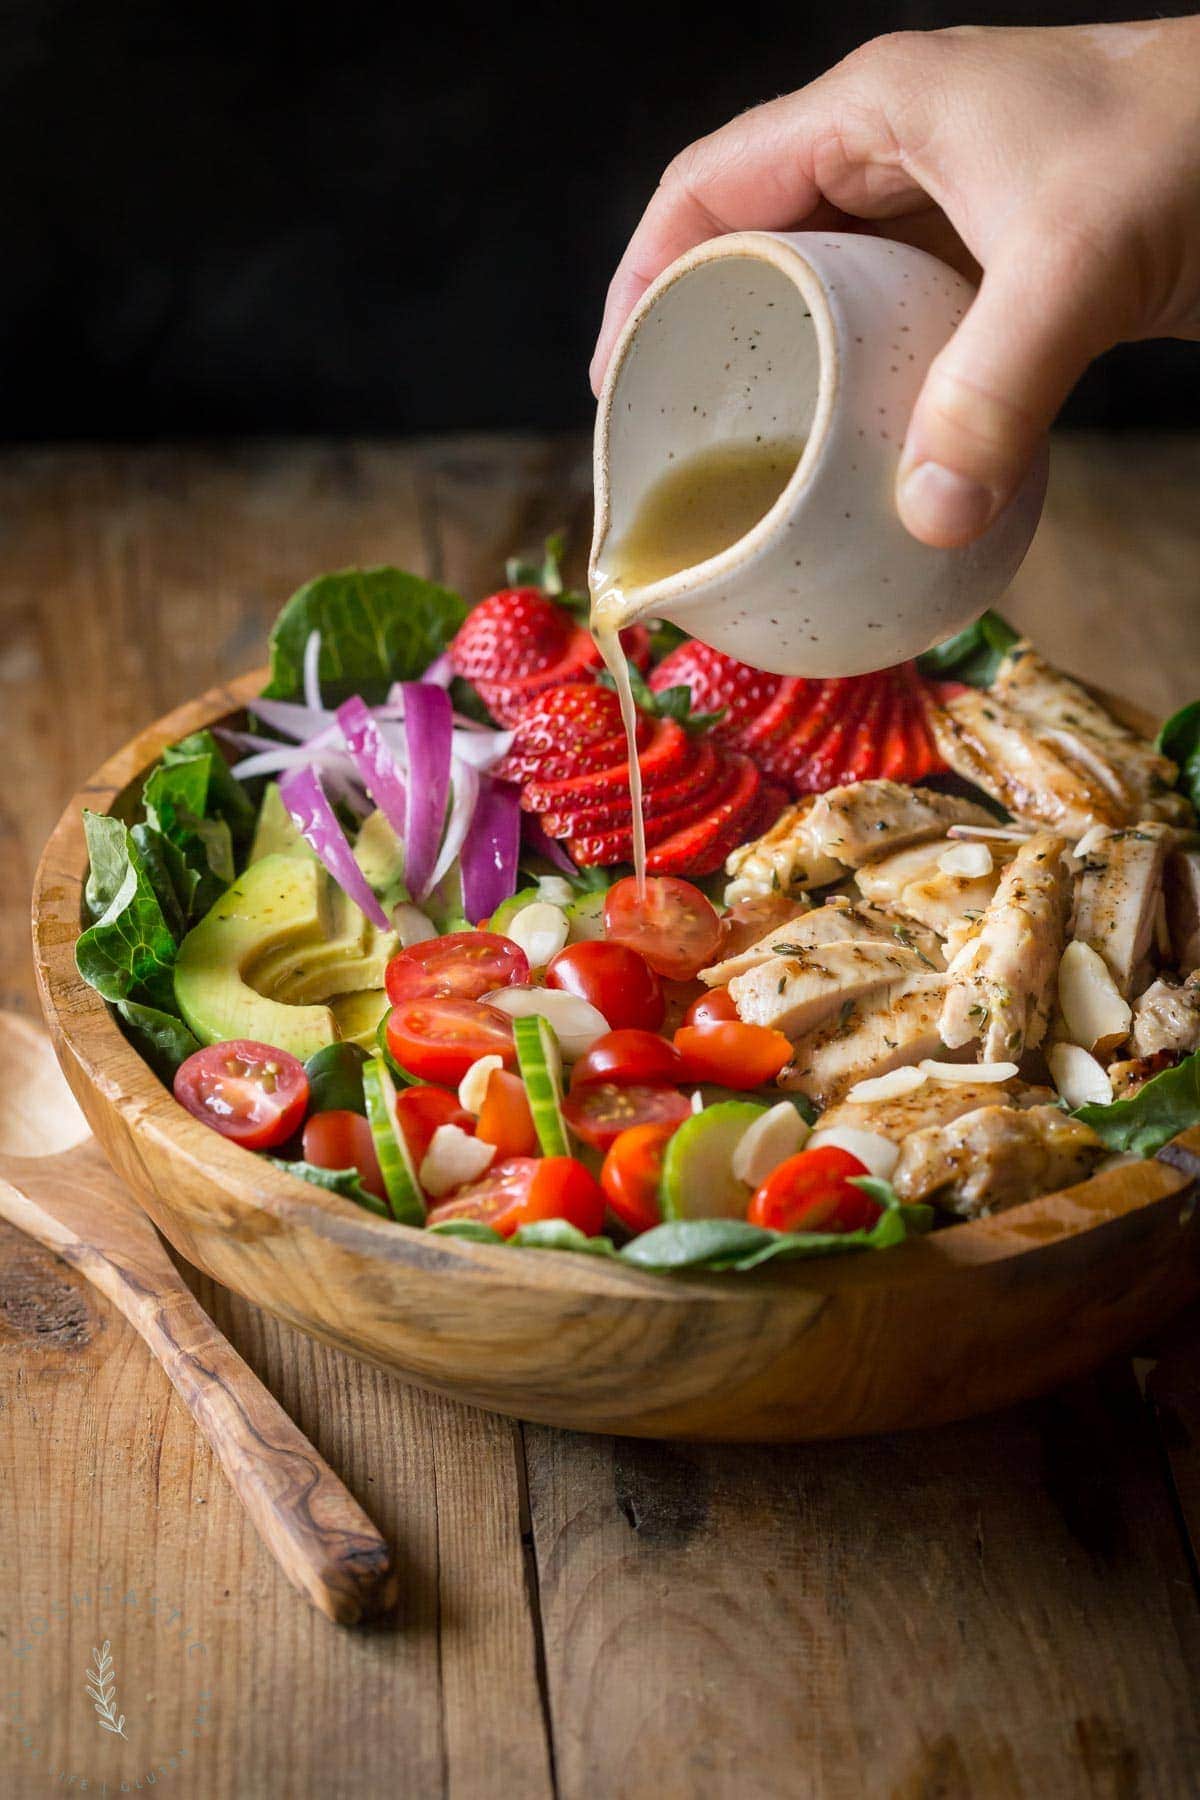 My Grilled Chicken Salad has all sorts of fabulous ingredients including, chicken marinated in garlic and fresh thyme, strawberries, almonds and is topped with an apple cider vinaigrette dressing. | www.noshtastic.com | #grilledchickensalad #chickensalad #grilledchicken #paleochickensalad #paleochicken #paleosalad #glutenfreesalad #glutenfree #noshtastic #glutenfreerecipe 